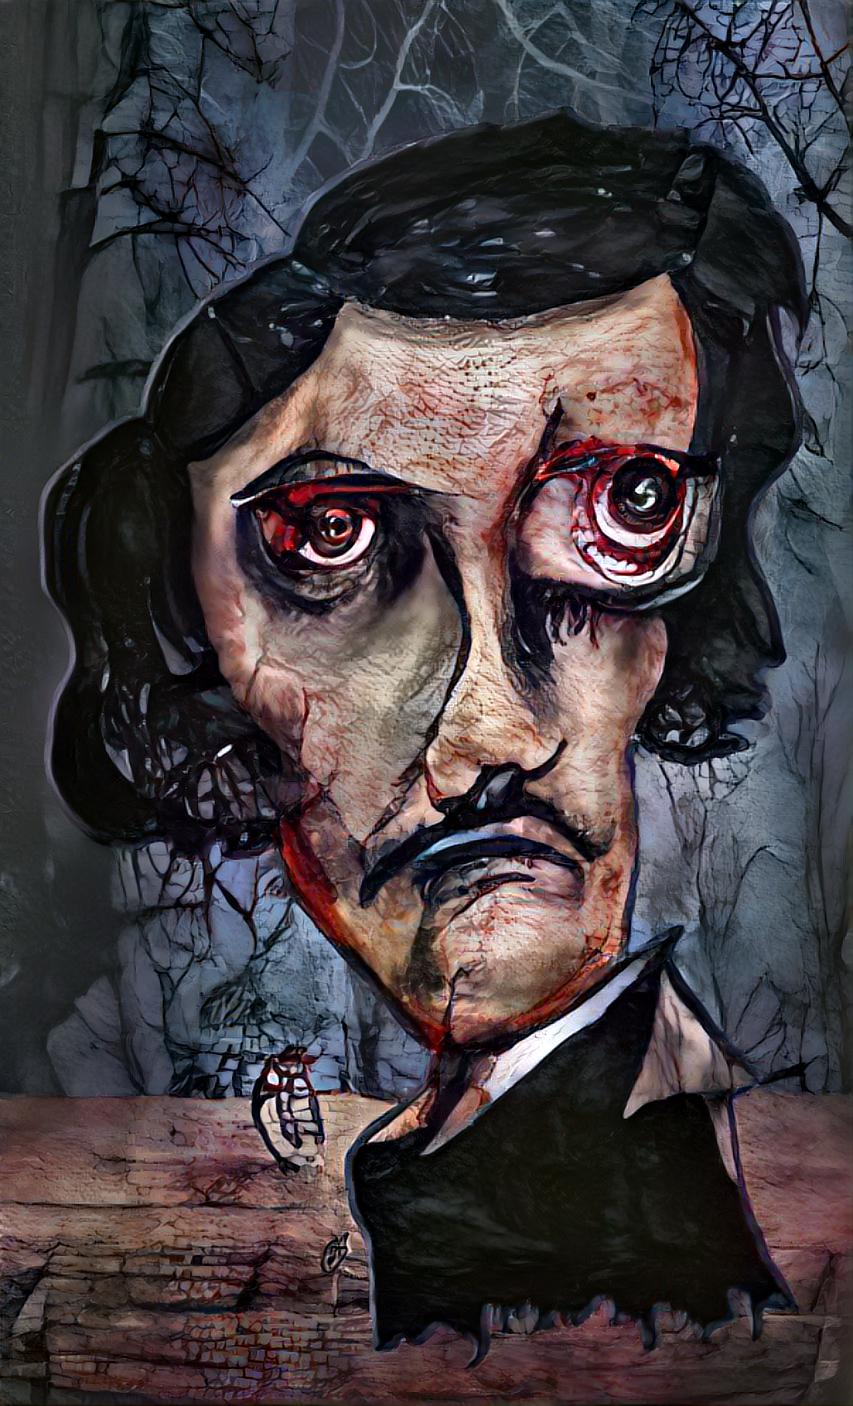 Another Poe